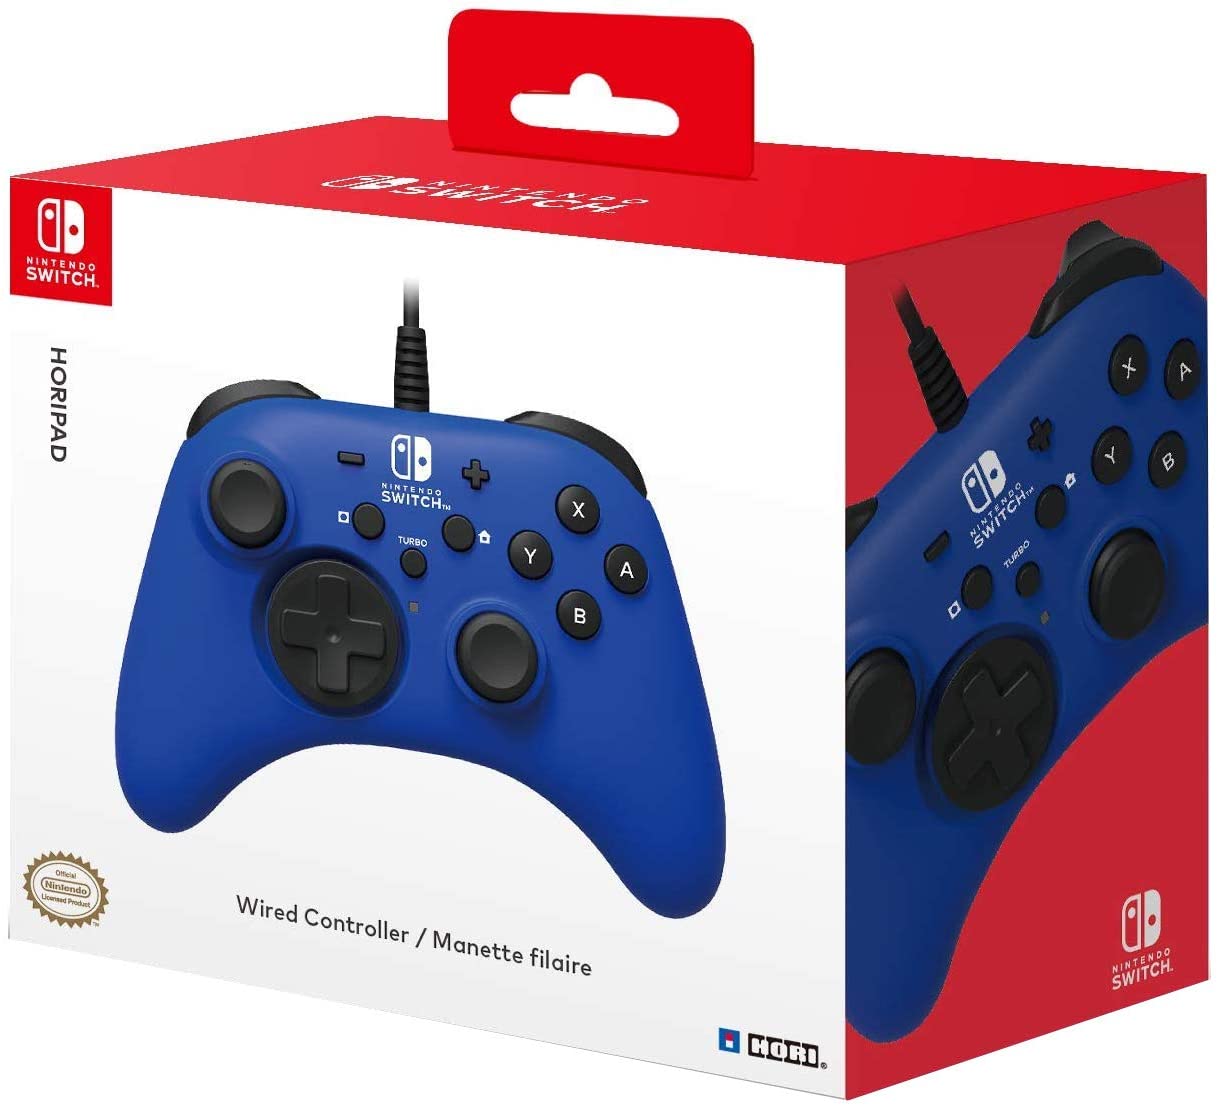 Horipad Wired Controller For Nintendo Switch - Blue